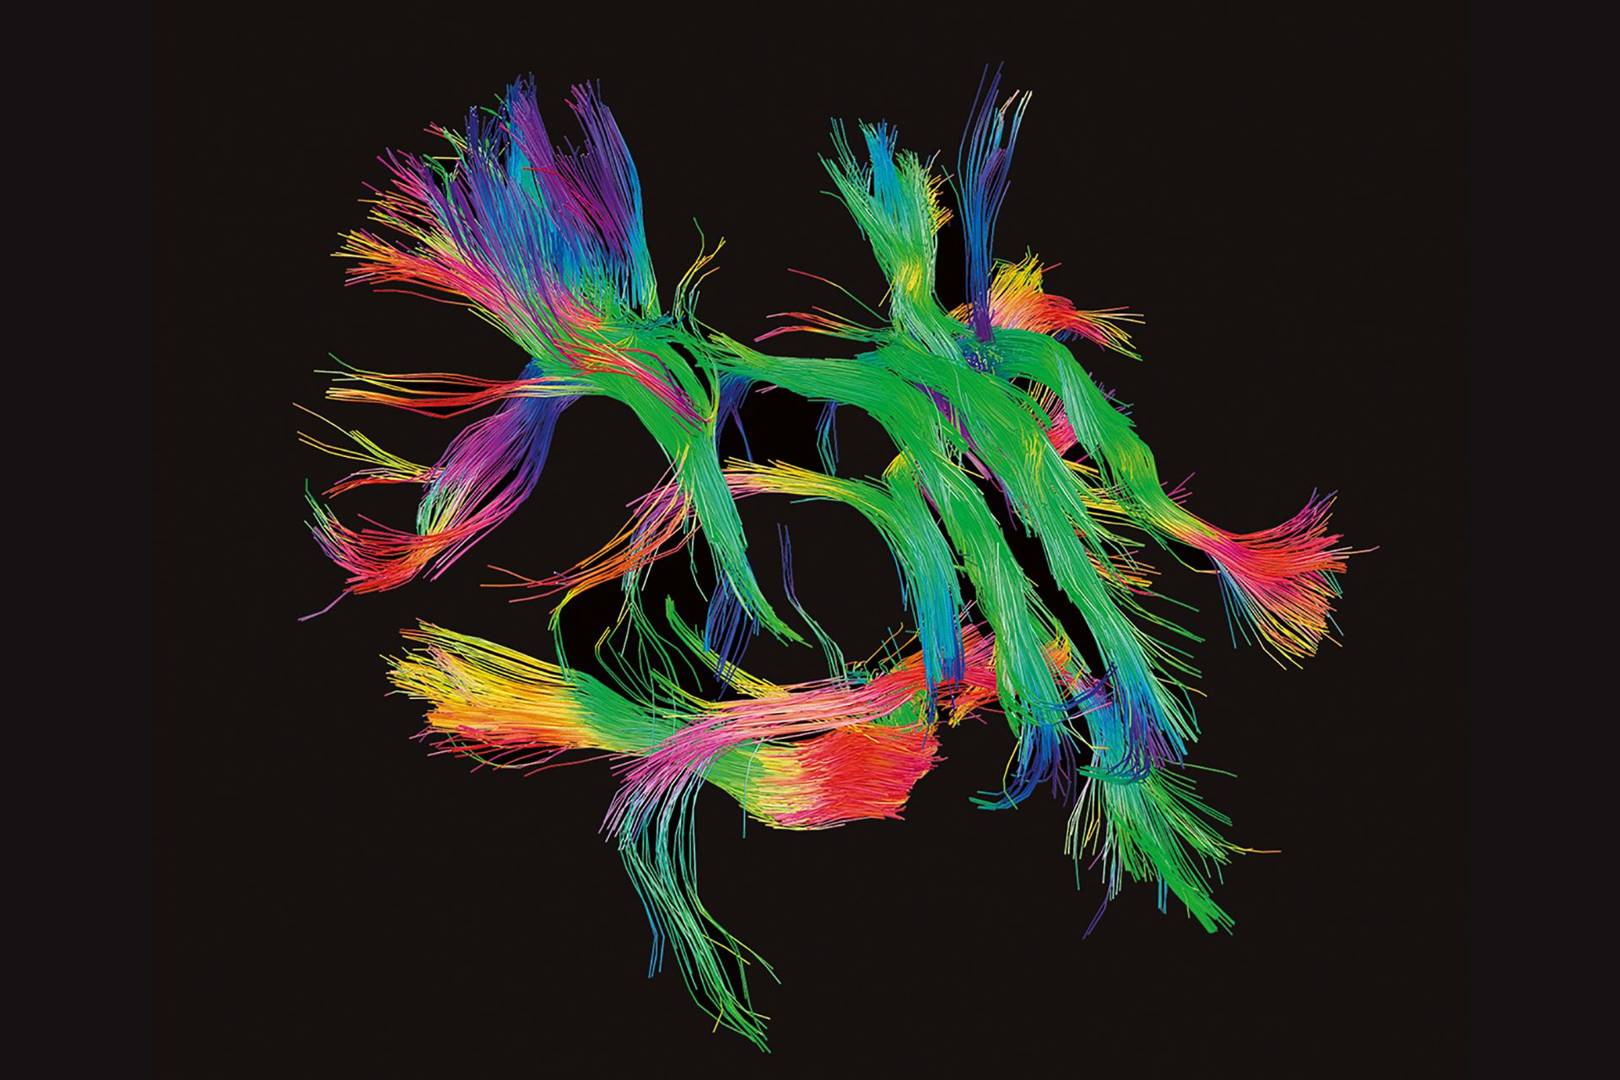 Not so grey matter! Brain scans are transformed into beautiful and sprawling works of neon art